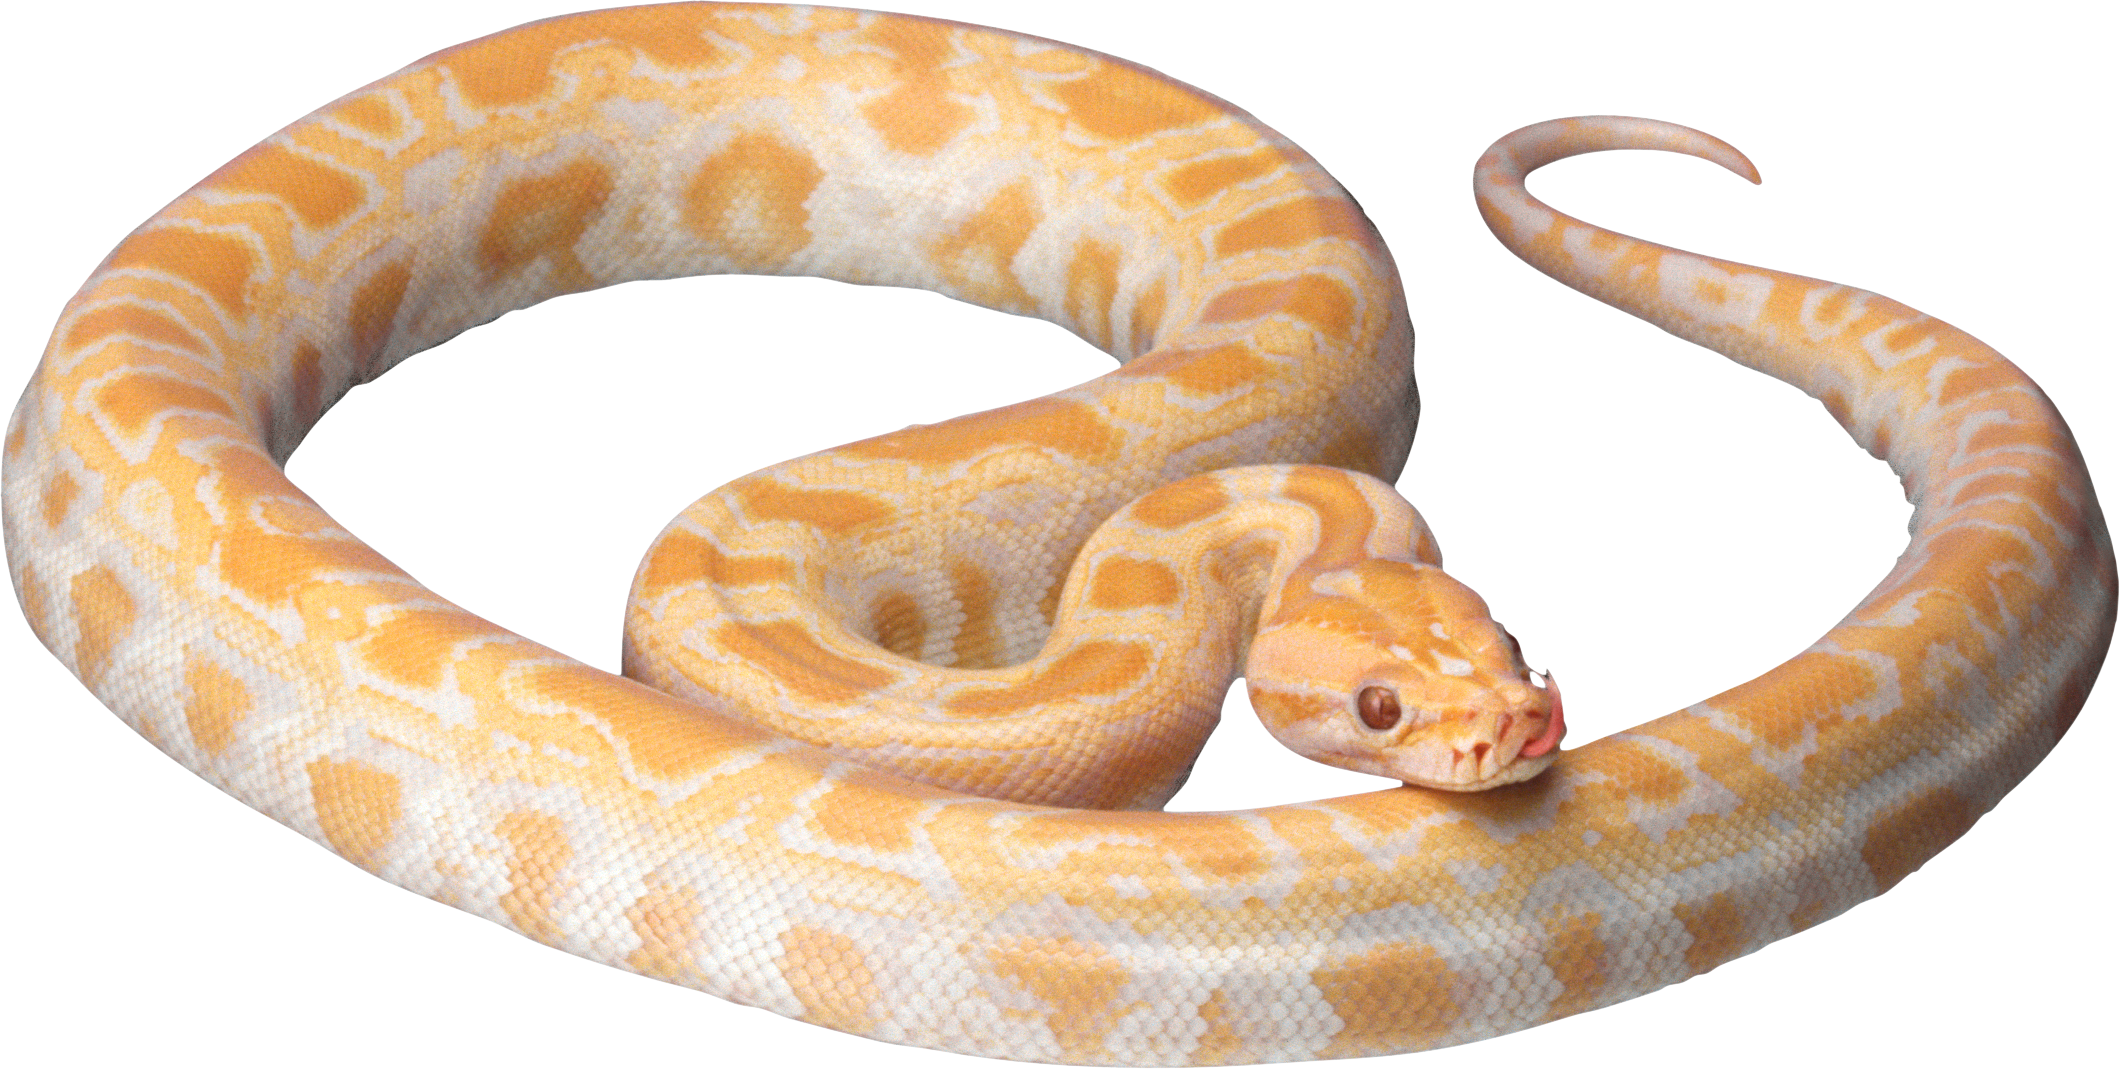 White snake PNG image picture download free